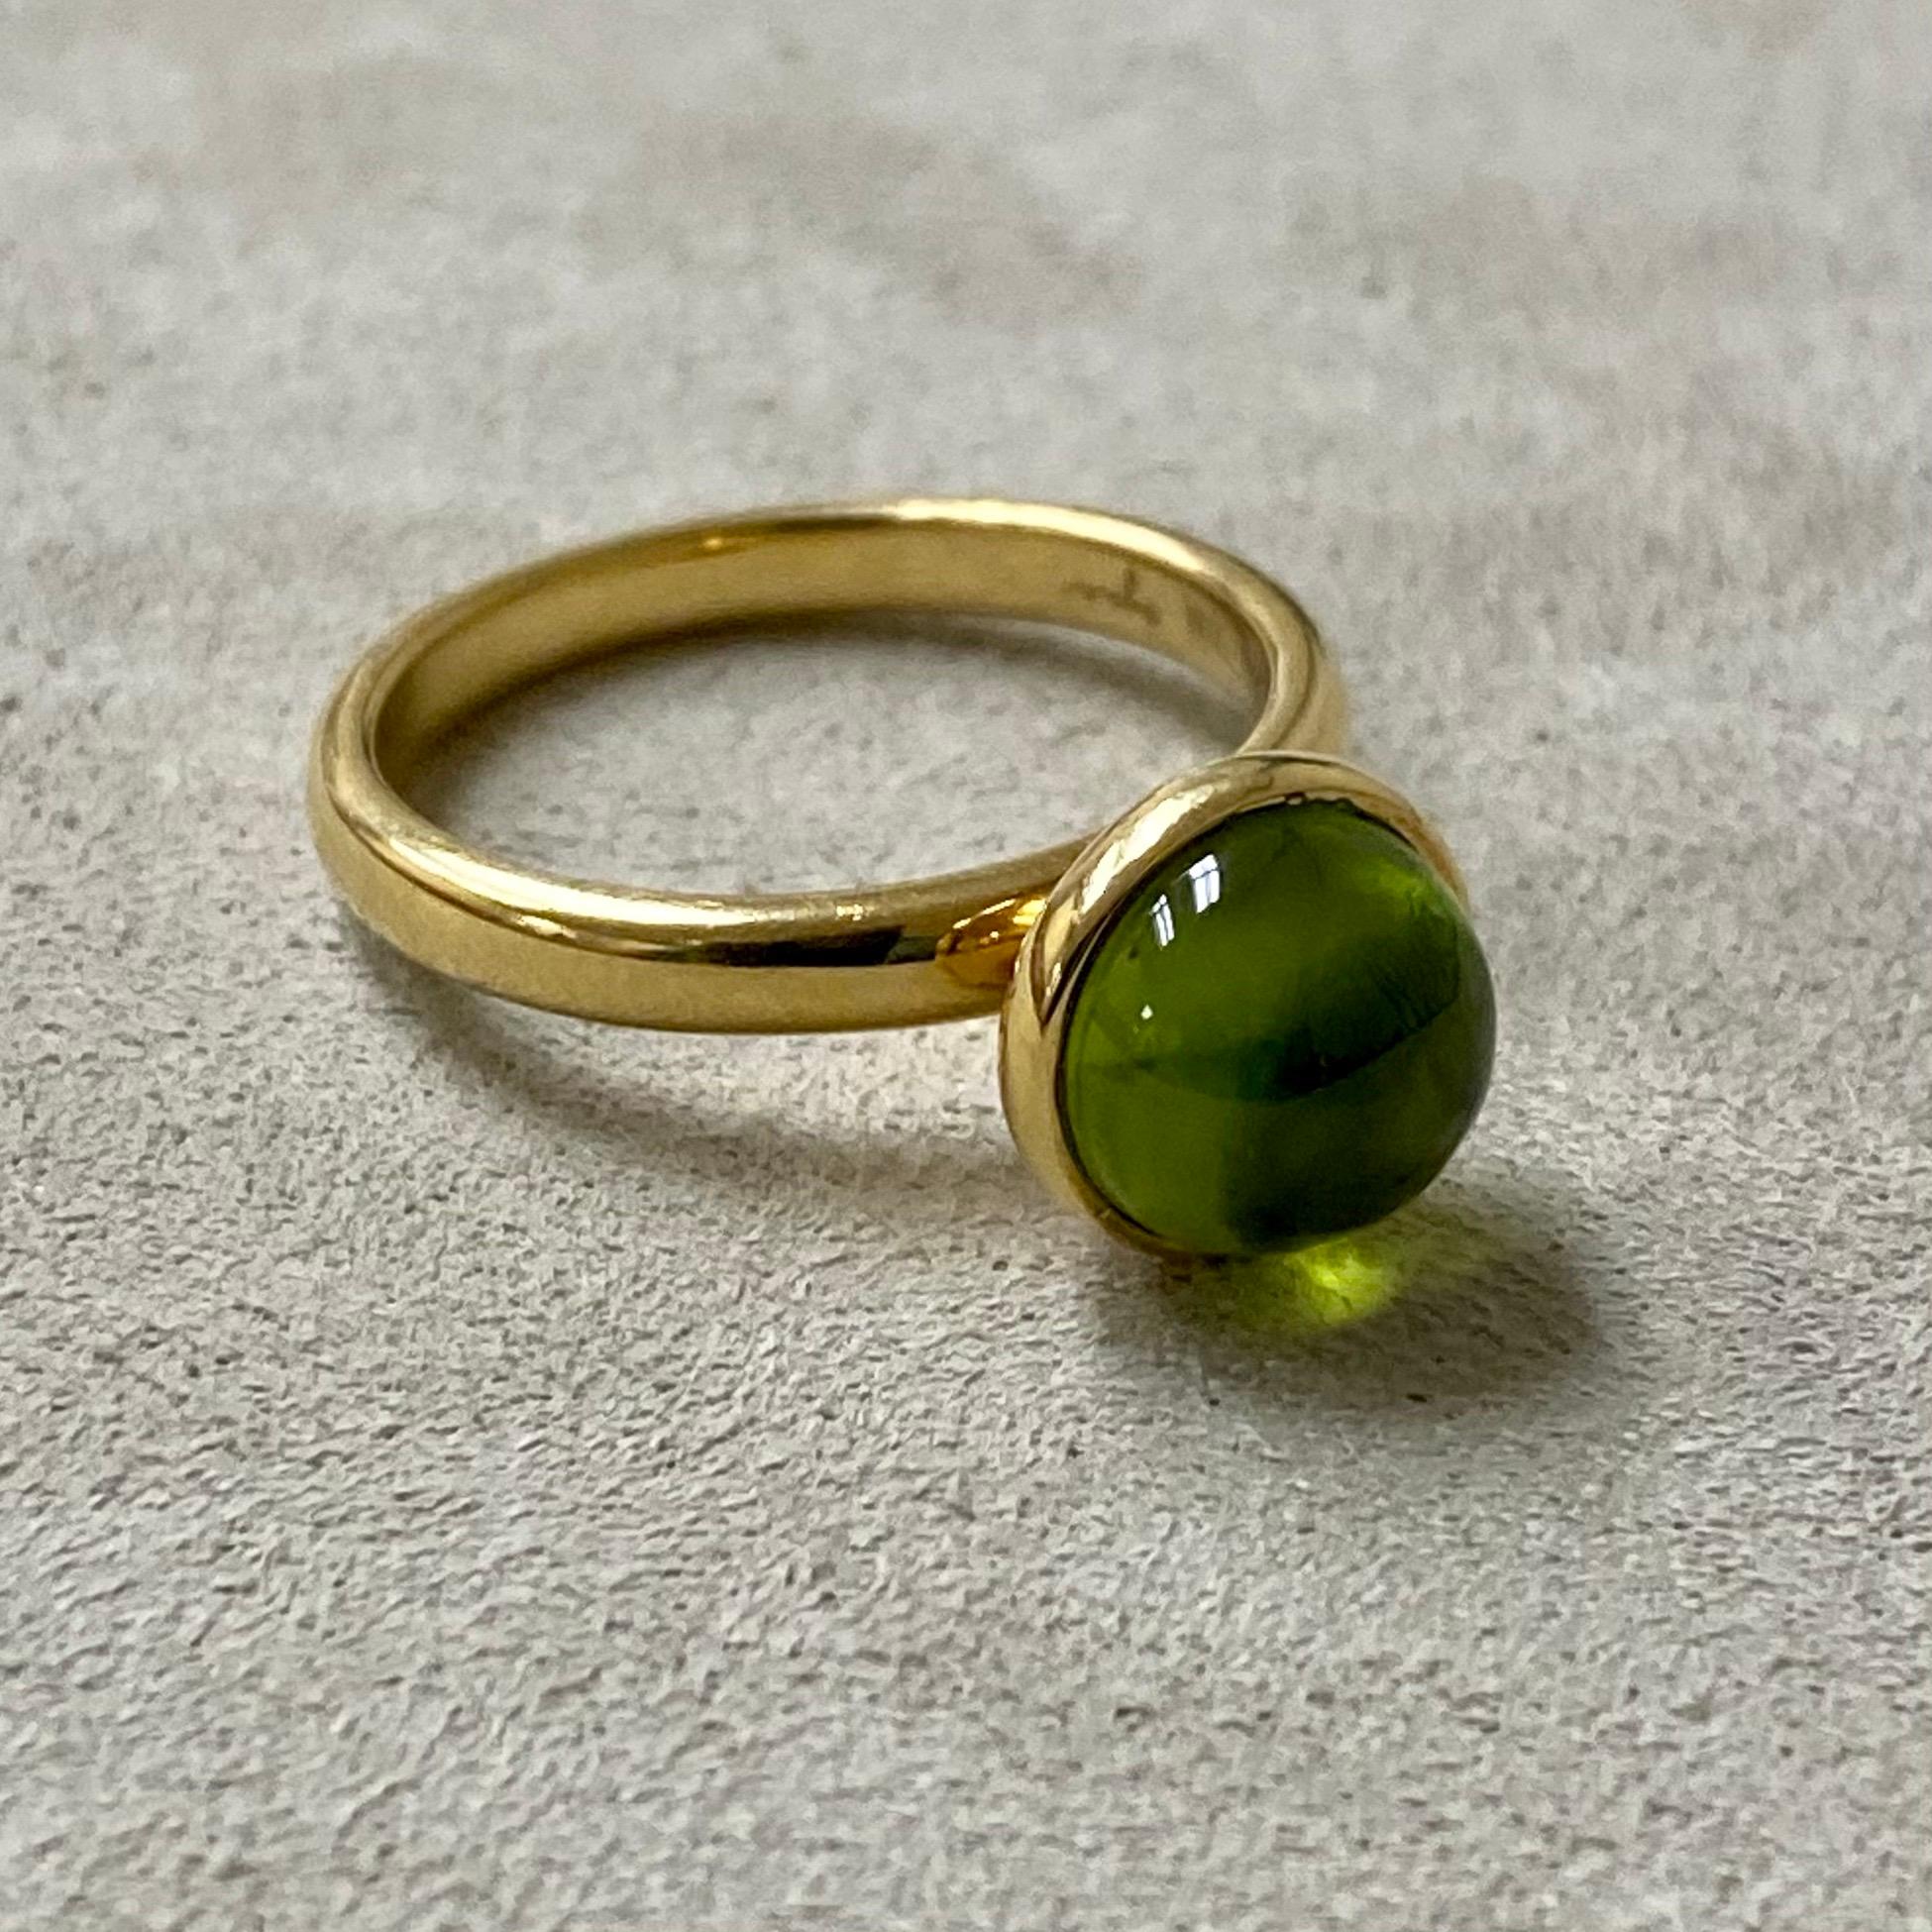 Created in 18 karat yellow gold
Peridot 2 carats approx.
Ring size US 6.5, can be sized upon request.

Exquisitely crafted in 18 karat yellow gold, this elegant ring features a stunning peridot set atop its band. Boasting a 2-carat size, this piece